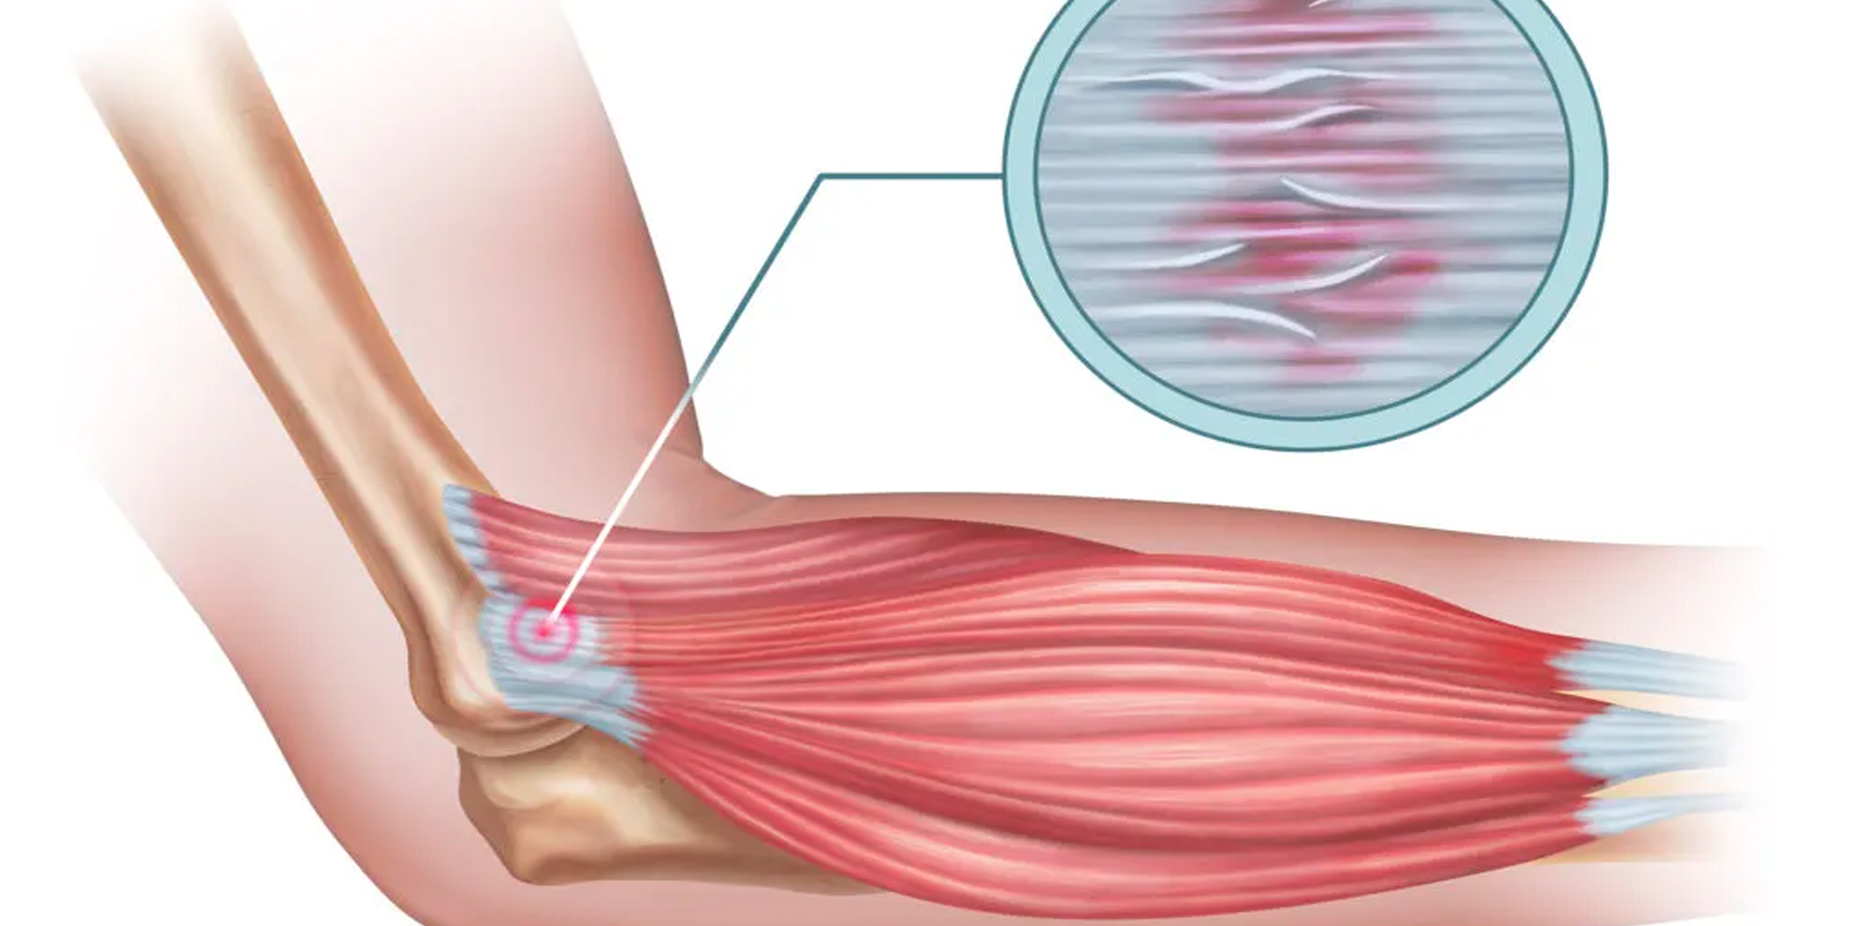 Tendinopathy: Symtoms, Causes, Treatments, and More